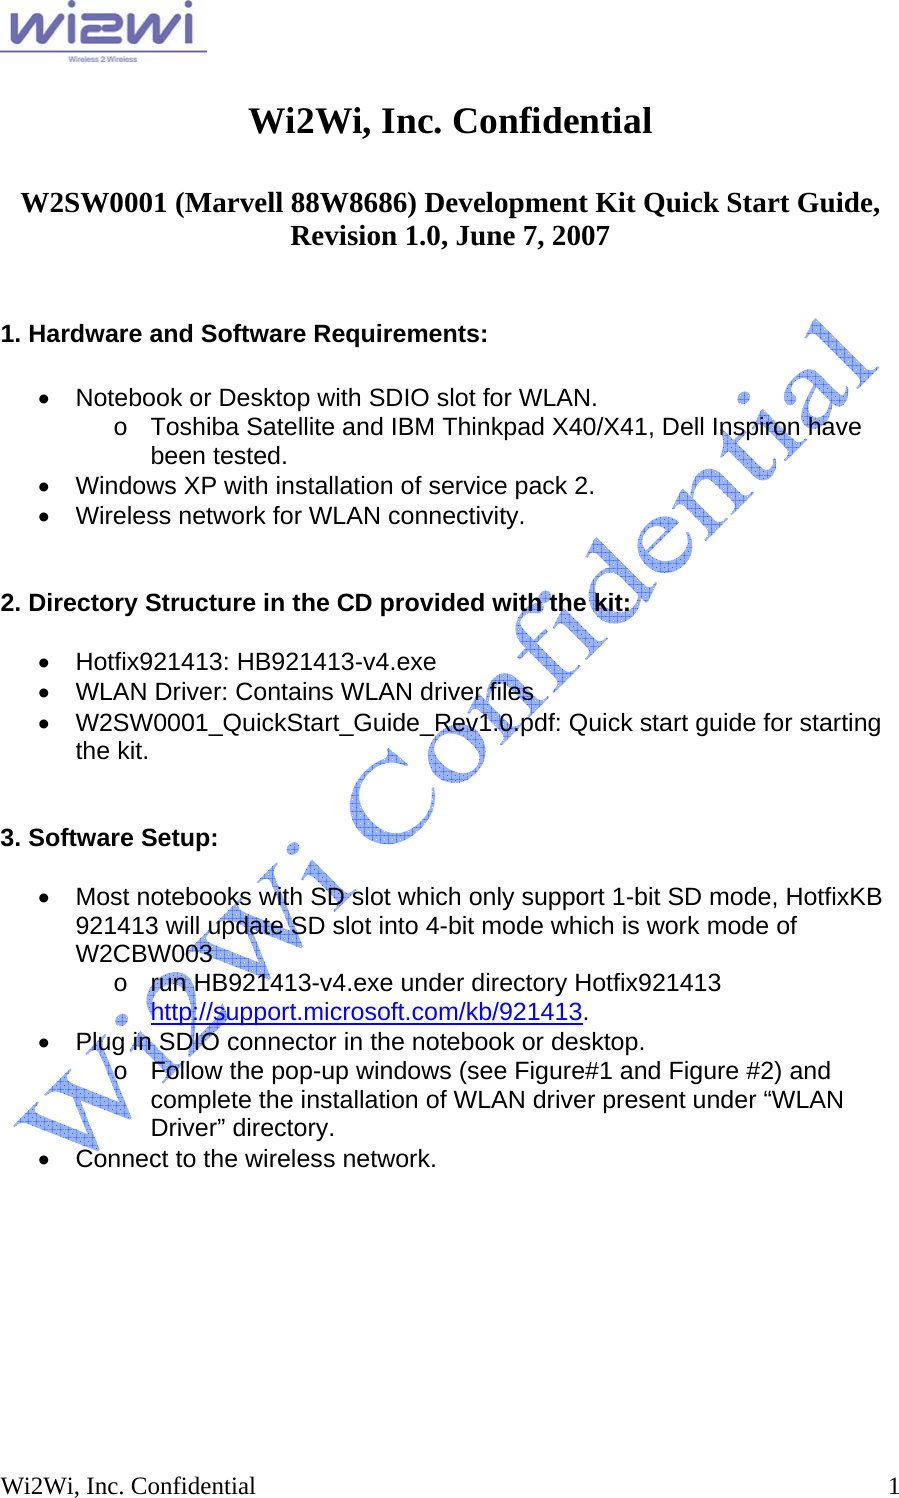  Wi2Wi, Inc. Confidential  1 Wi2Wi, Inc. Confidential  W2SW0001 (Marvell 88W8686) Development Kit Quick Start Guide, Revision 1.0, June 7, 2007   1. Hardware and Software Requirements:  •  Notebook or Desktop with SDIO slot for WLAN. o  Toshiba Satellite and IBM Thinkpad X40/X41, Dell Inspiron have been tested. •  Windows XP with installation of service pack 2. •  Wireless network for WLAN connectivity.   2. Directory Structure in the CD provided with the kit:  • Hotfix921413: HB921413-v4.exe •  WLAN Driver: Contains WLAN driver files • W2SW0001_QuickStart_Guide_Rev1.0.pdf: Quick start guide for starting the kit.   3. Software Setup:  •  Most notebooks with SD slot which only support 1-bit SD mode, HotfixKB 921413 will update SD slot into 4-bit mode which is work mode of W2CBW003 o  run HB921413-v4.exe under directory Hotfix921413  http://support.microsoft.com/kb/921413.   •  Plug in SDIO connector in the notebook or desktop. o  Follow the pop-up windows (see Figure#1 and Figure #2) and complete the installation of WLAN driver present under “WLAN Driver” directory. •  Connect to the wireless network.  